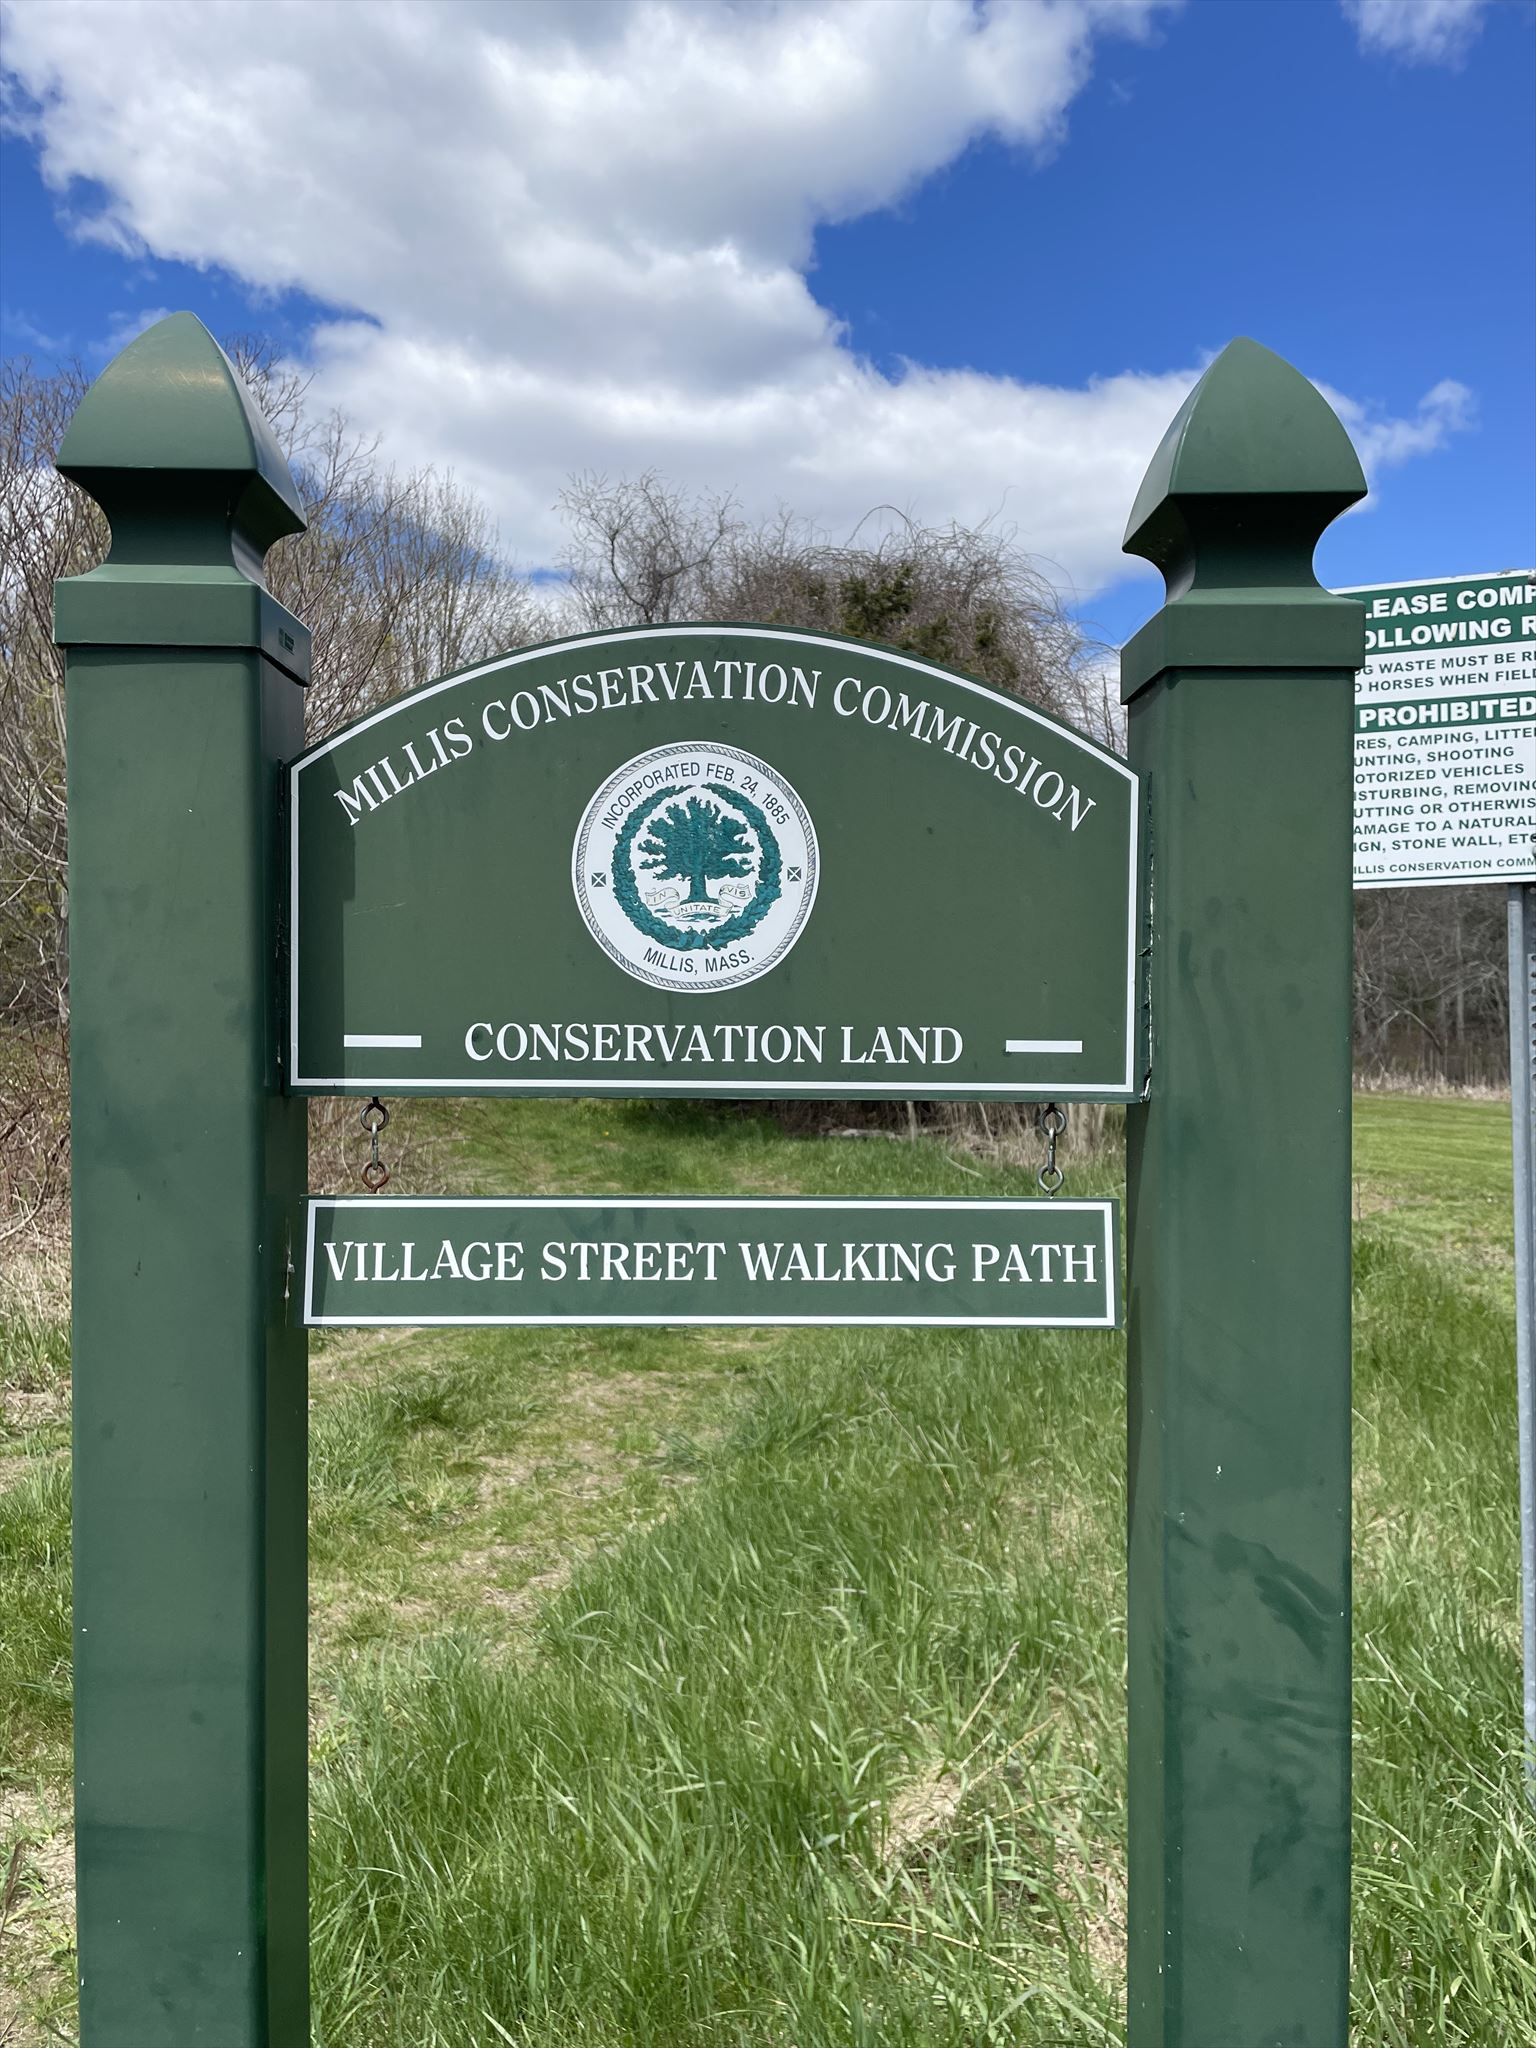 photo pf green wooden trailhead sign that says Millis Conservation Commission Village Street walking paths.  Trees and a blue sky with clouds in the background.  